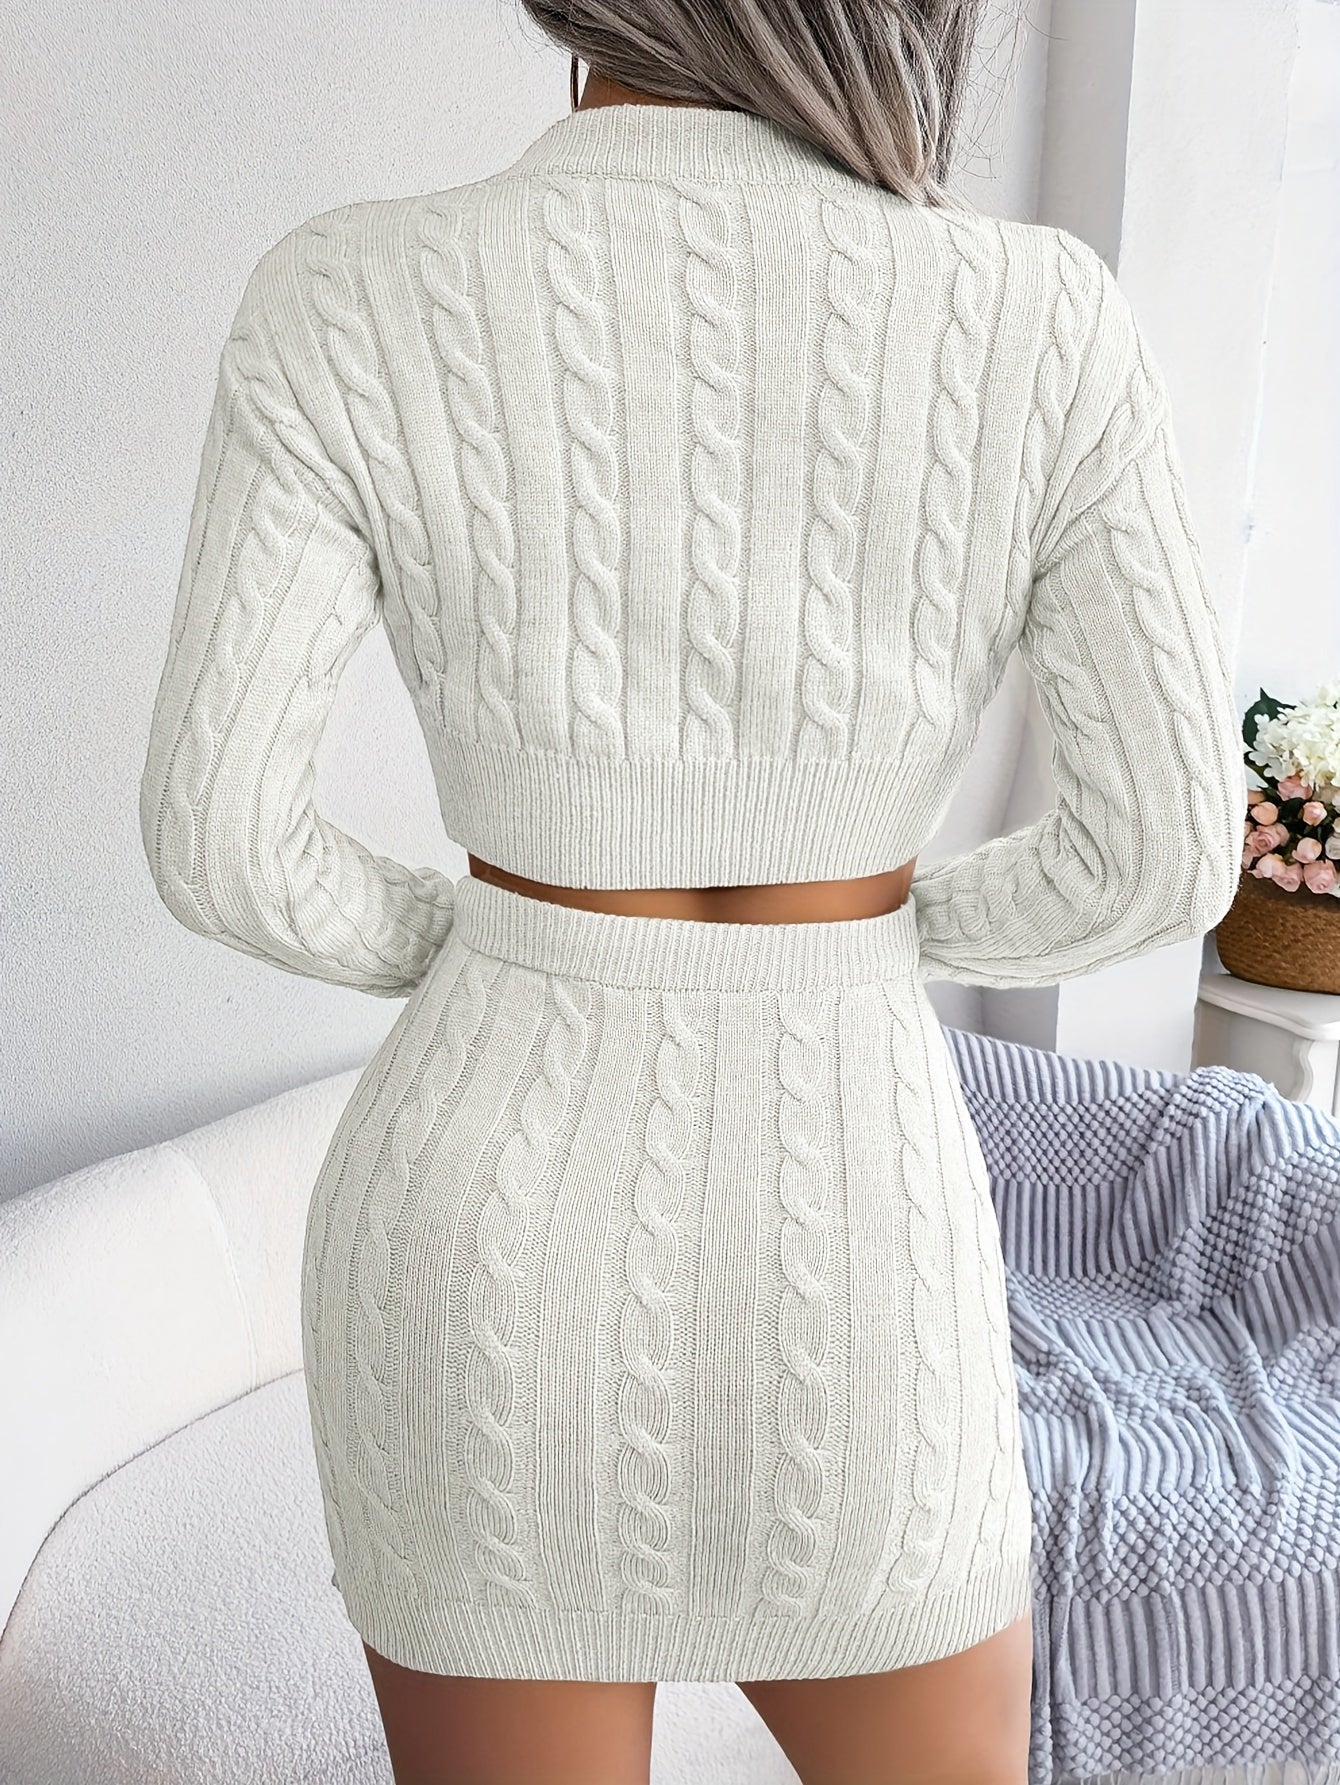 Antmvs Cable Knit Solid Two-piece Set, Crew Neck Long Sleeve Sweater & Bag Hip Skirts Outfits, Women's Clothing